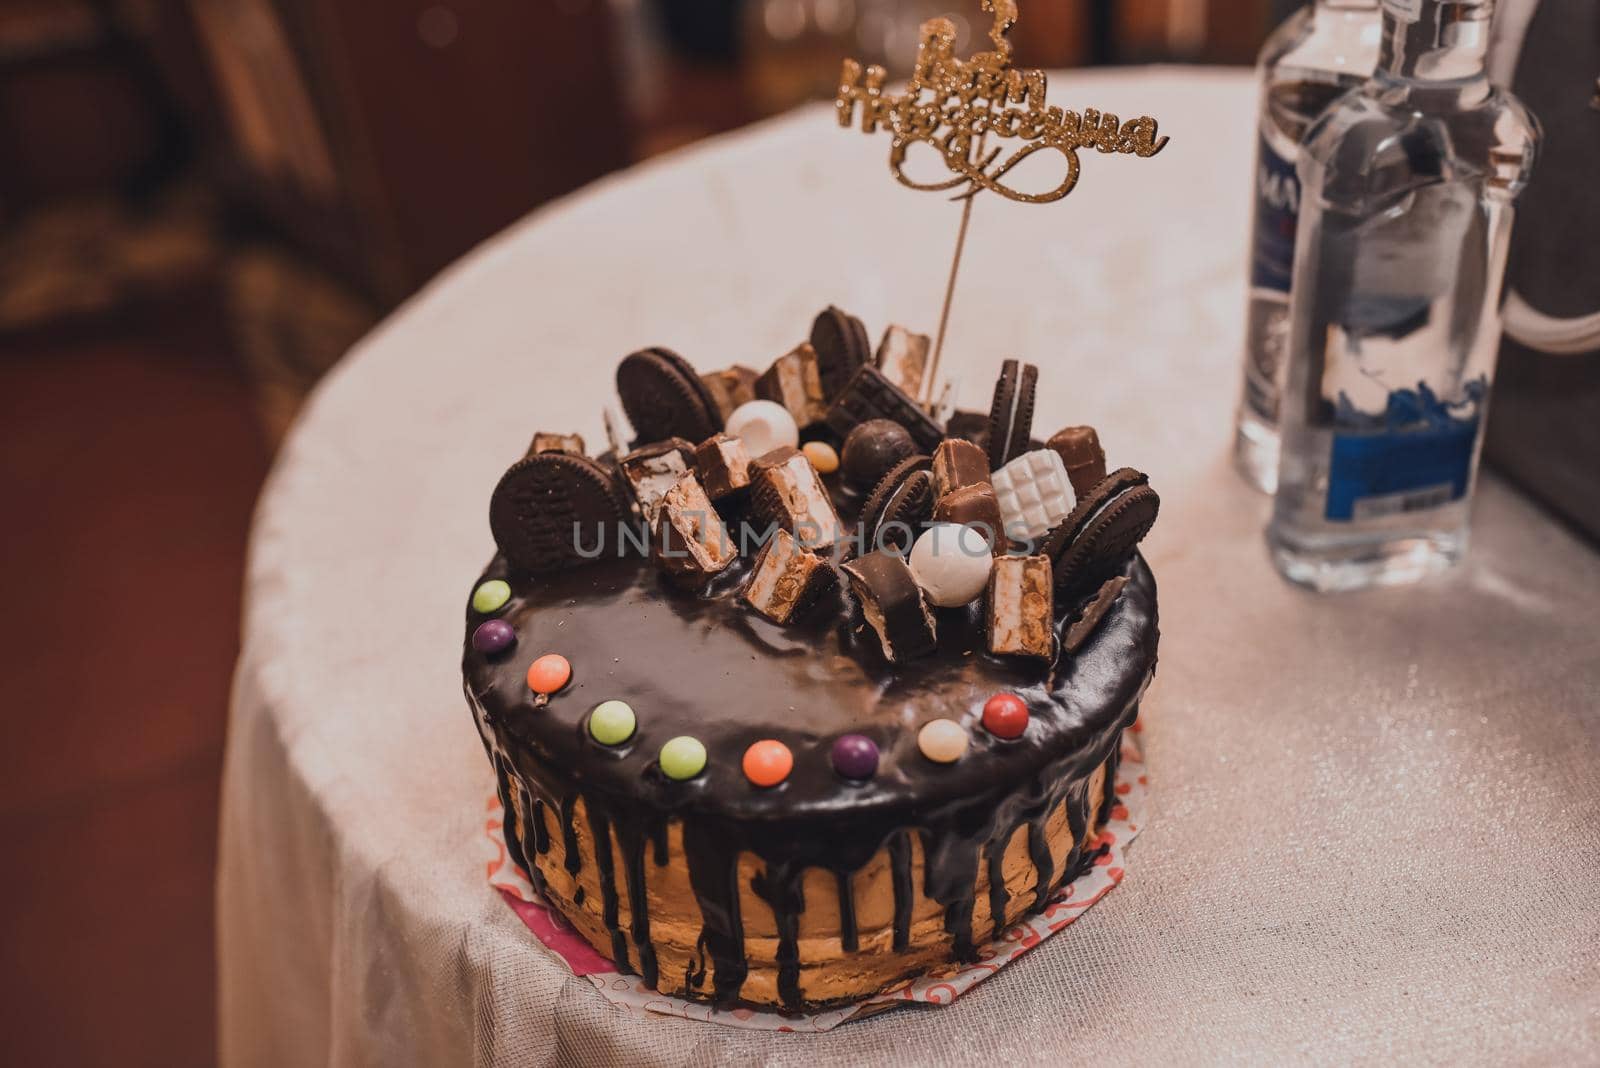 Table with food for the holiday. Cuisine. Culinary Buffet. Dinner Catering. Dining Food. Celebration Party. Concept wedding birthday. Sweet pastries desserts